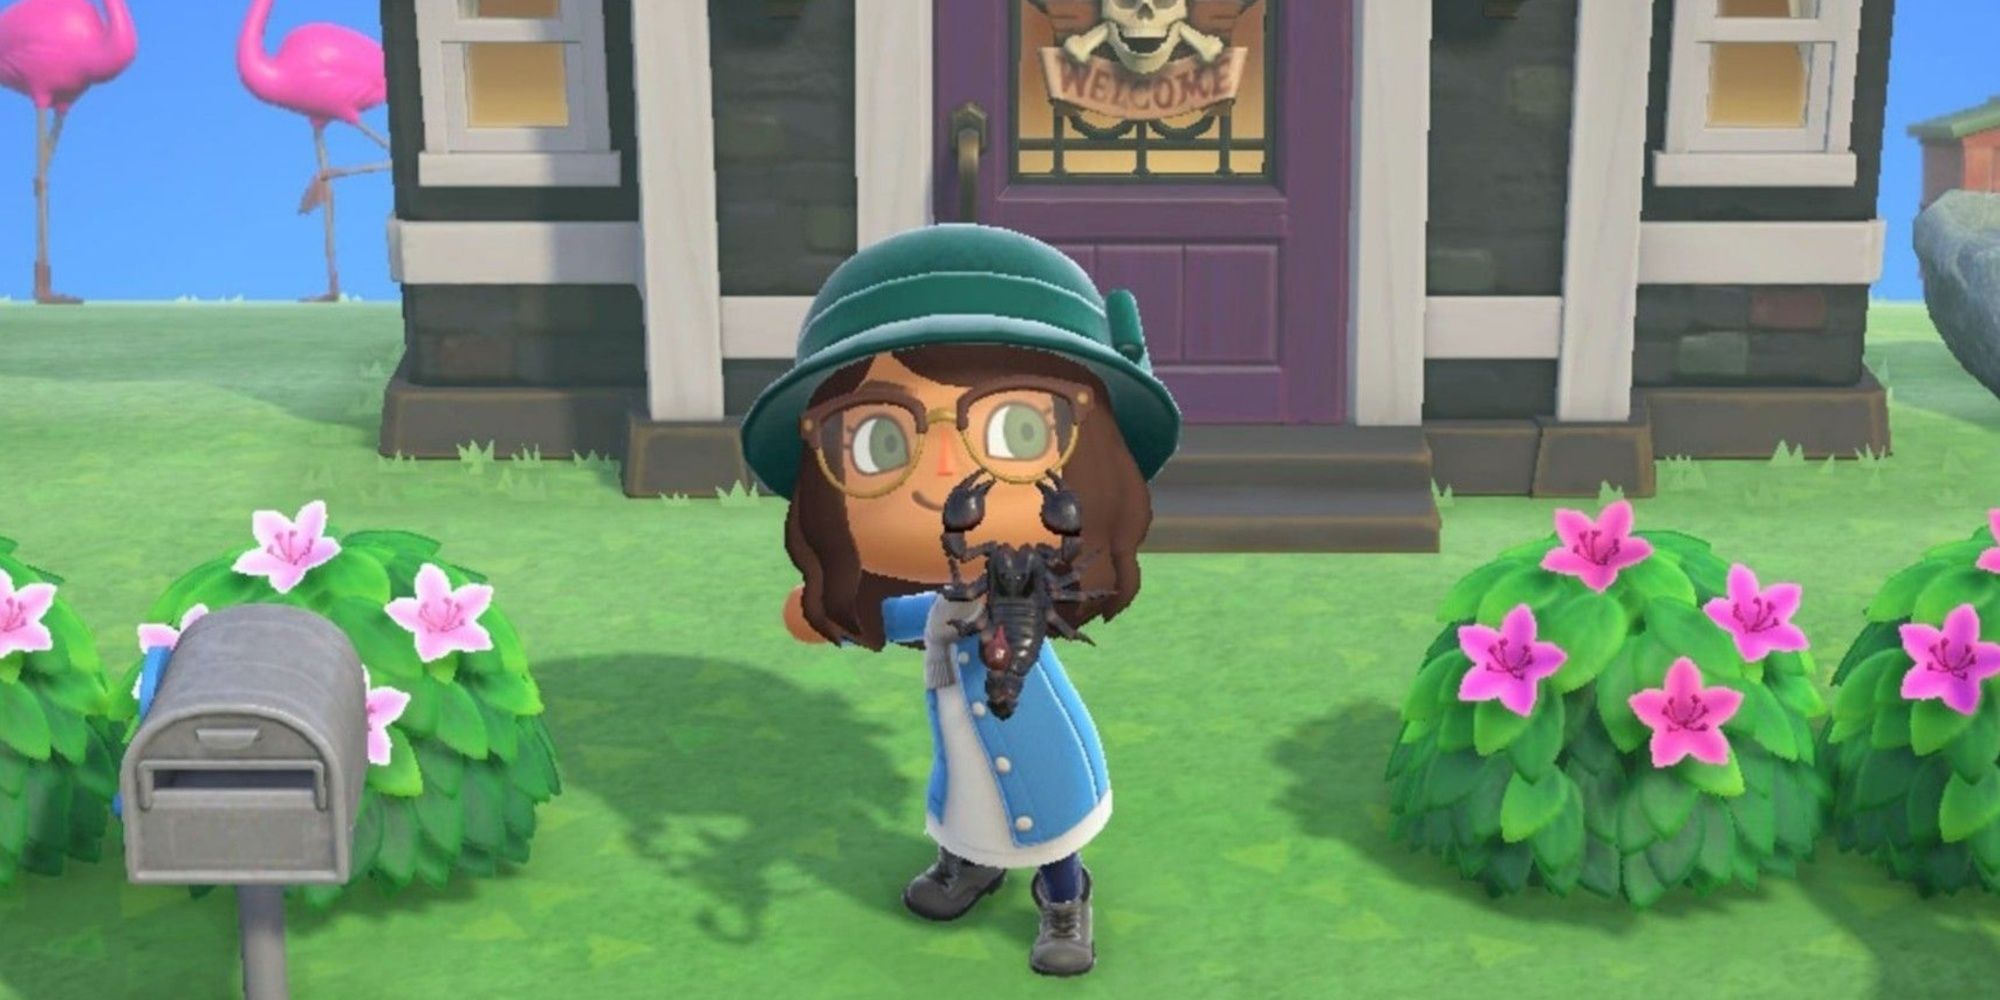 Player showing off a scorpion in Animal Crossing: New Horizons.